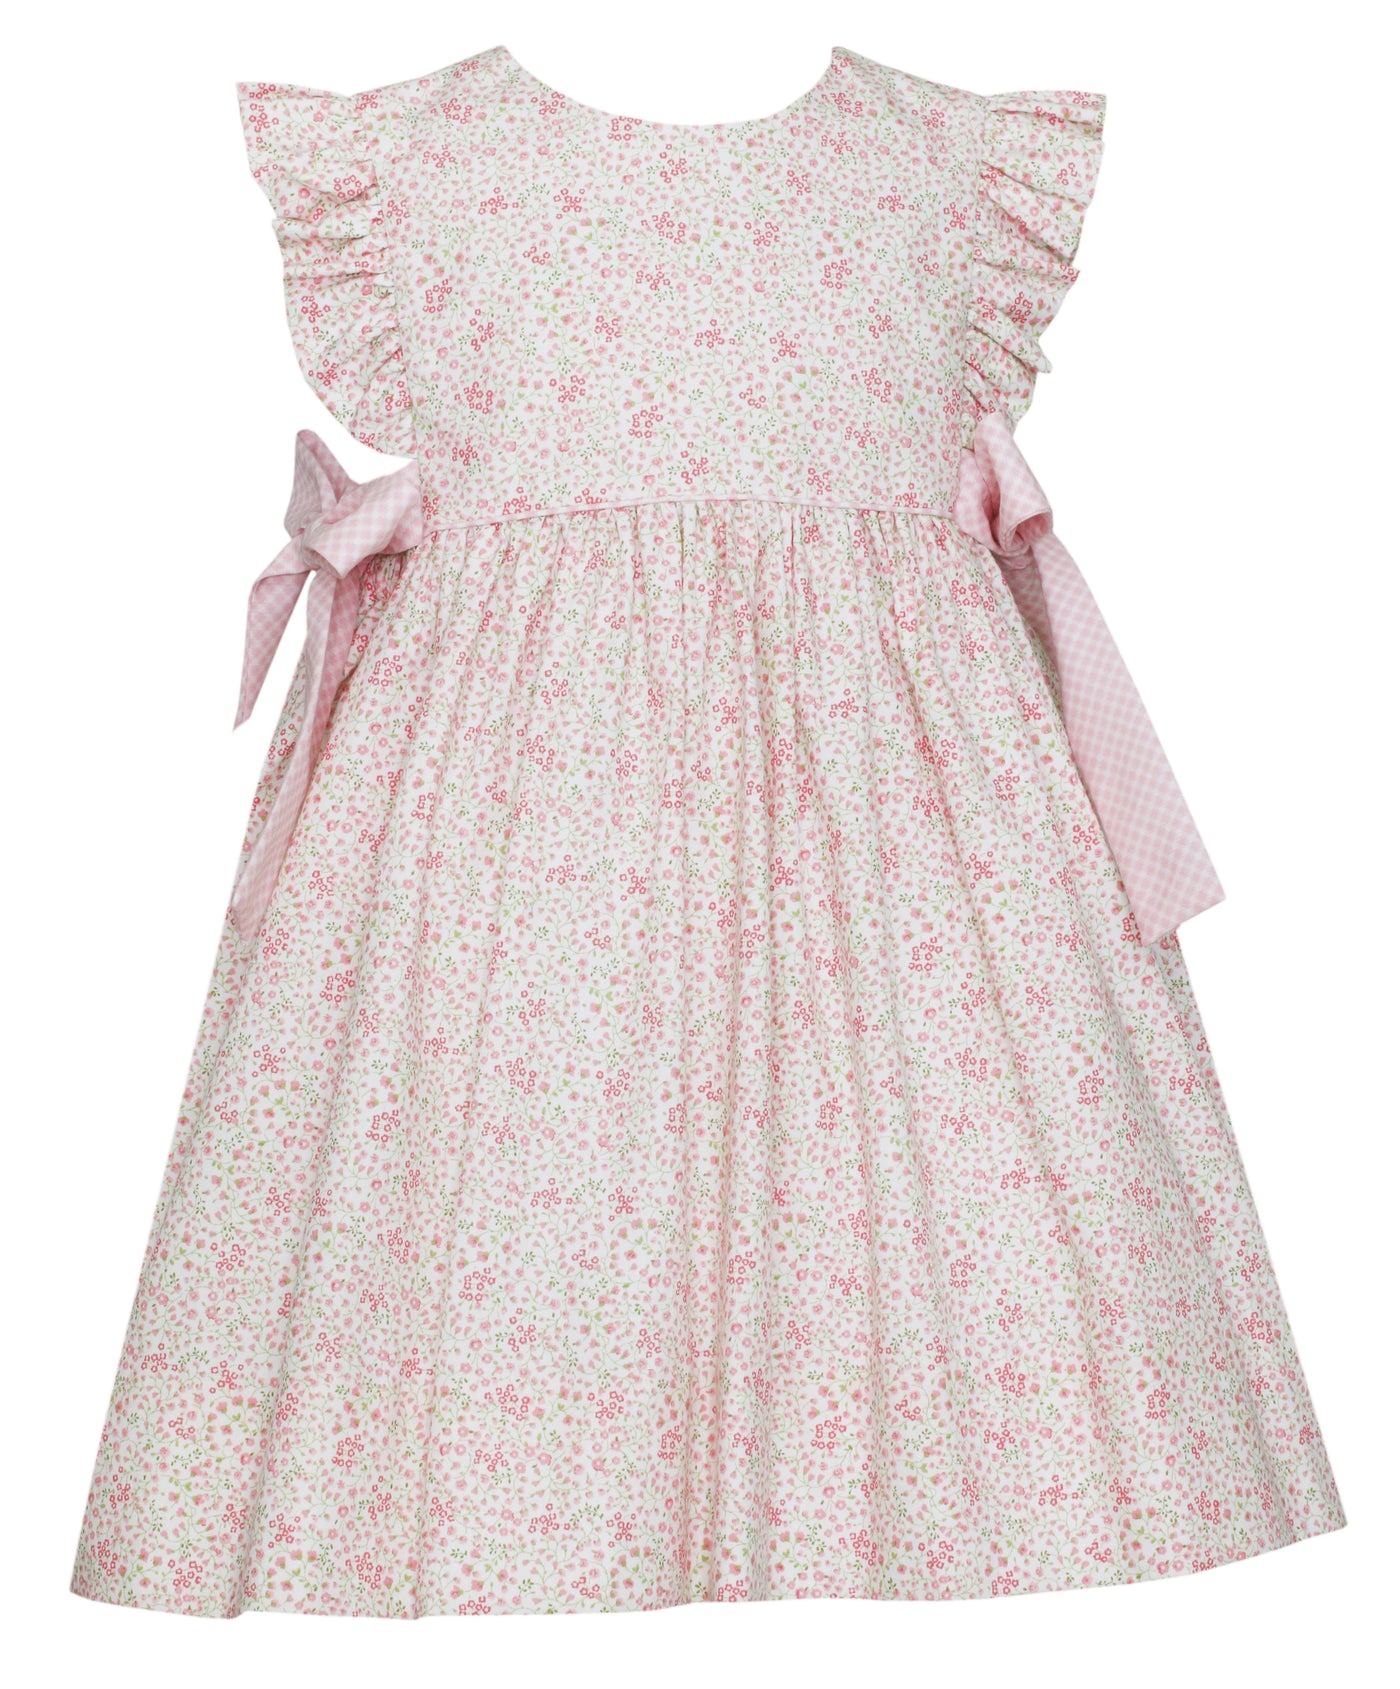 Liberty Floral Dress with Ruffle Sleeves